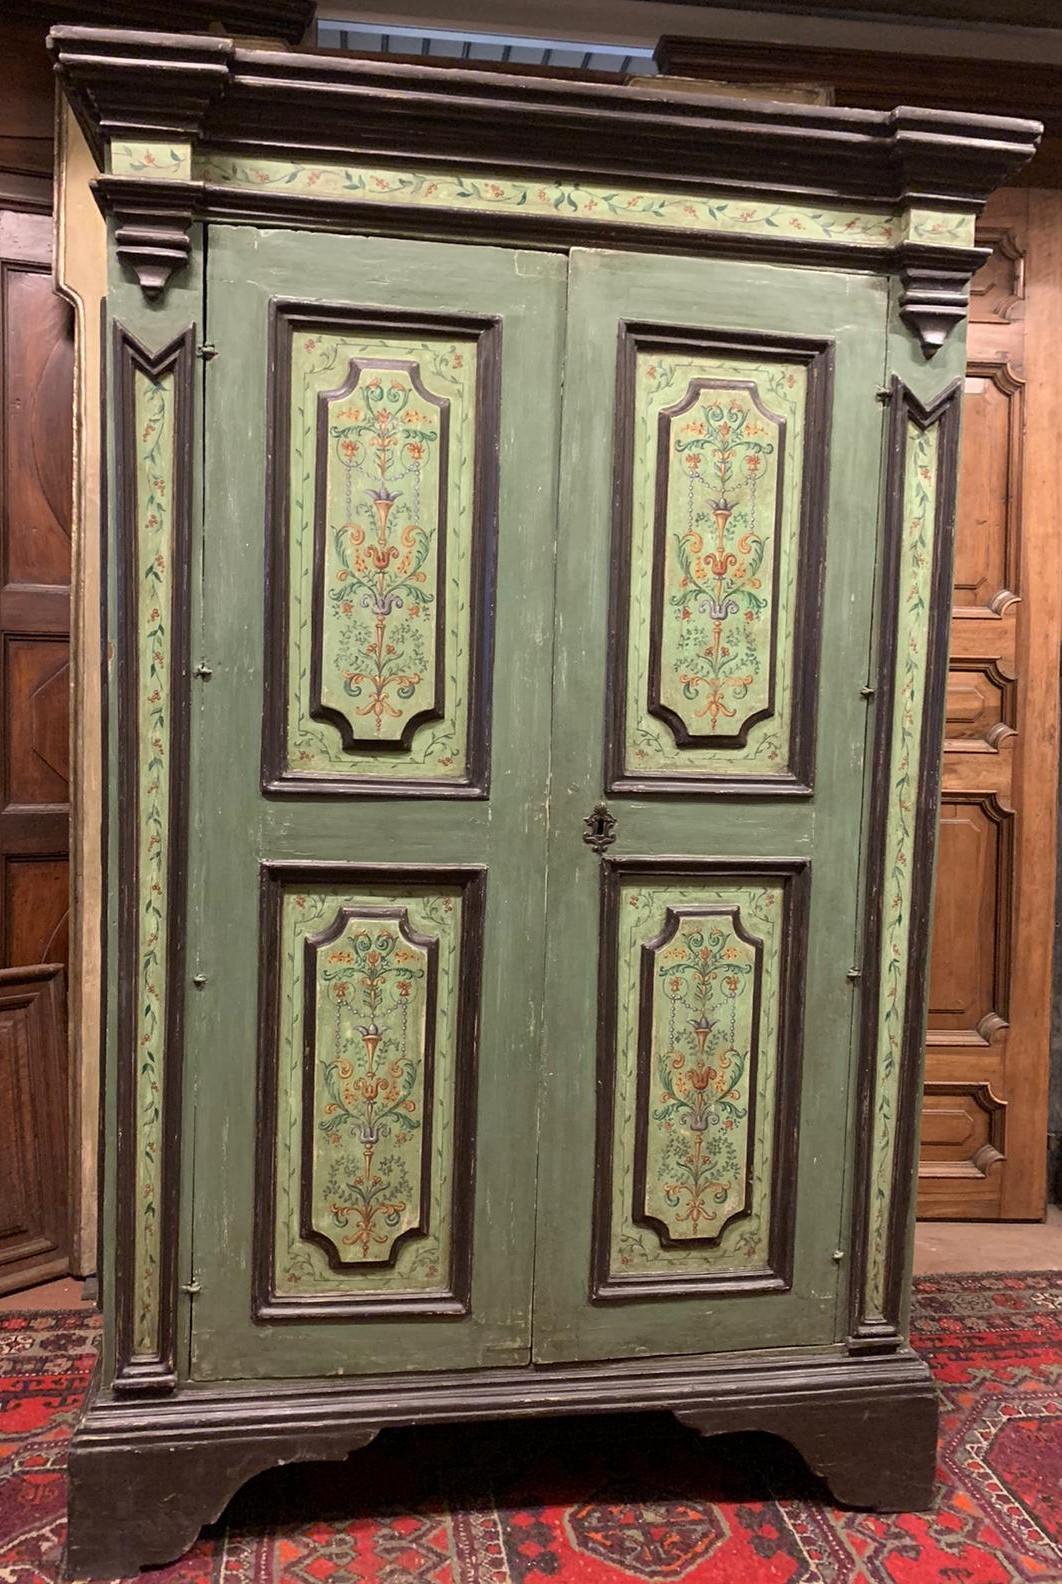 Antique double door wardrobe, hand-carved and painted with a majority of blue / green colors, floral motifs typical of the time, built in the middle of the 1700s by an artisan artist in Italy.
In excellent condition, versatile and suitable for many